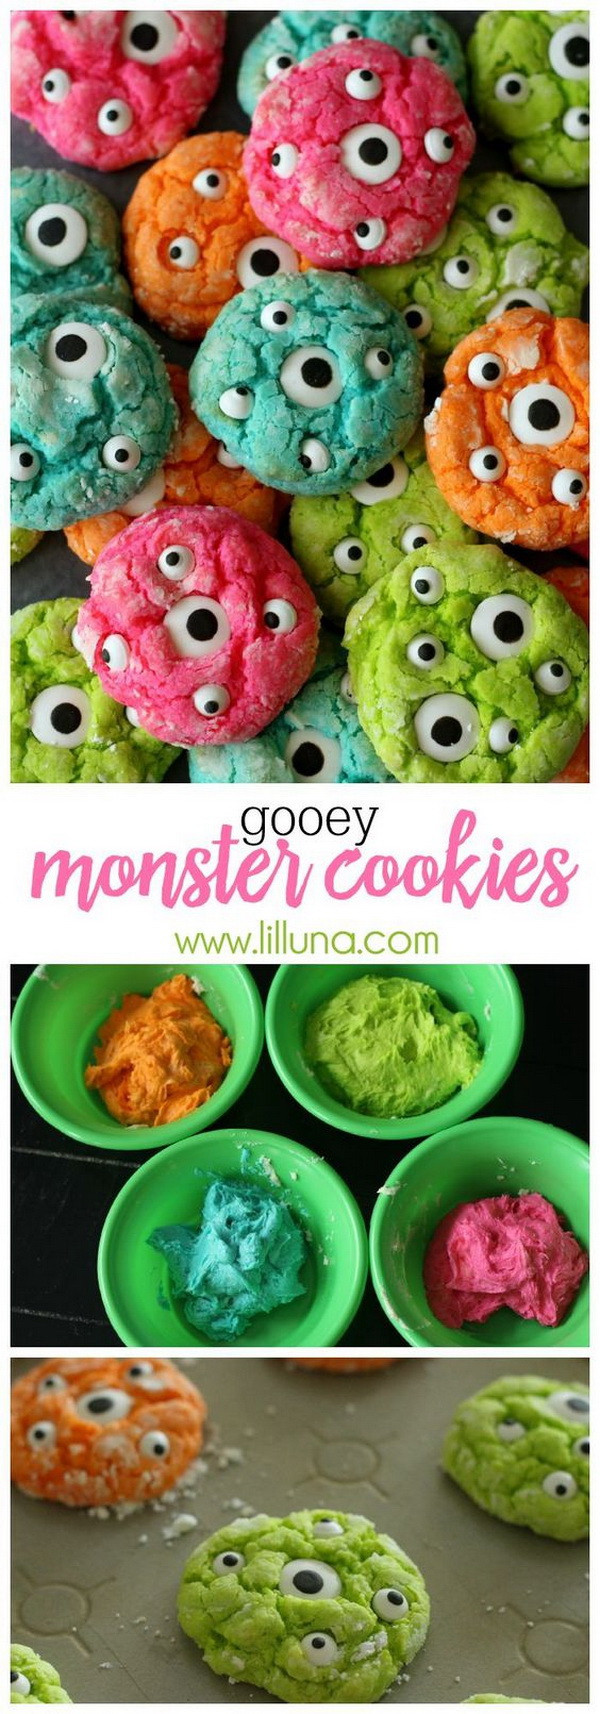 Cute Halloween Cookies
 15 Super Easy and Cute Halloween Treats to Make For